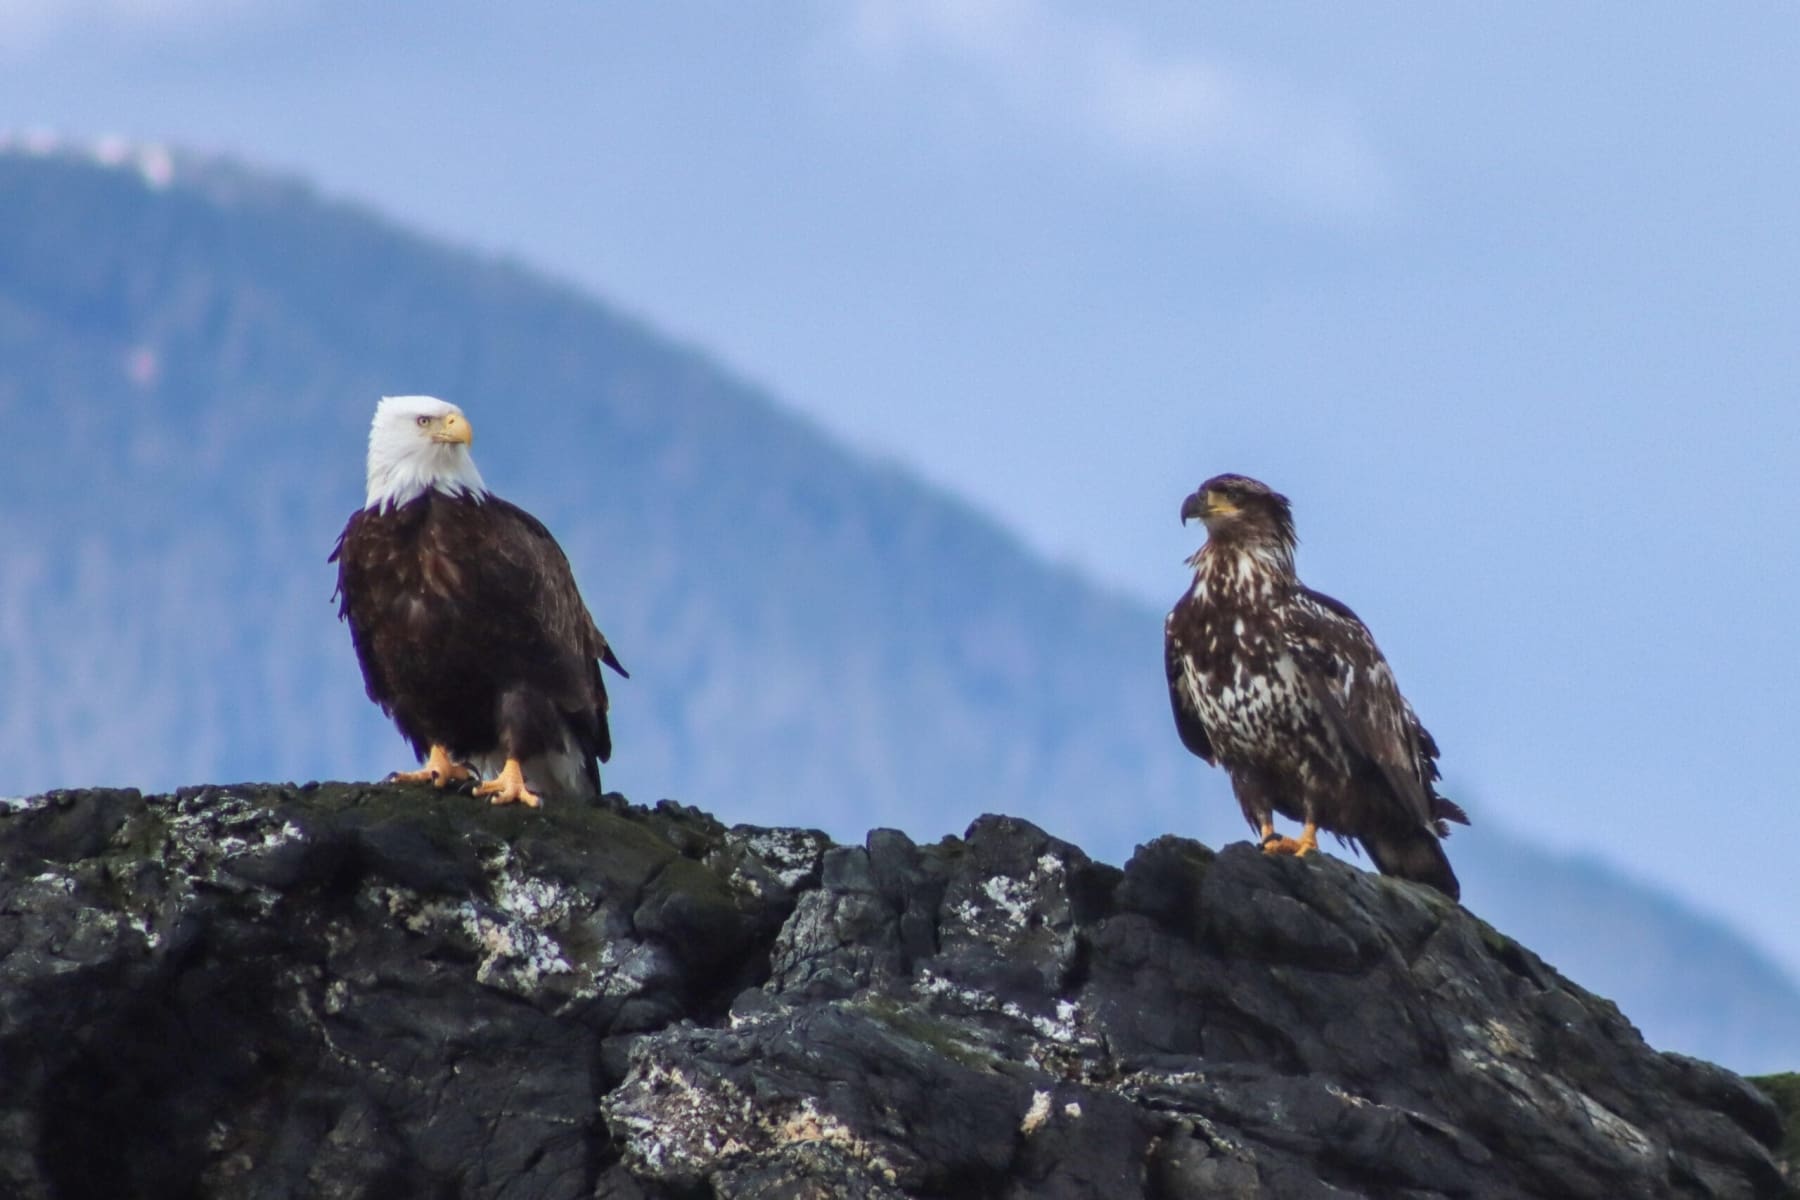 Adult and immature Bald Eagles